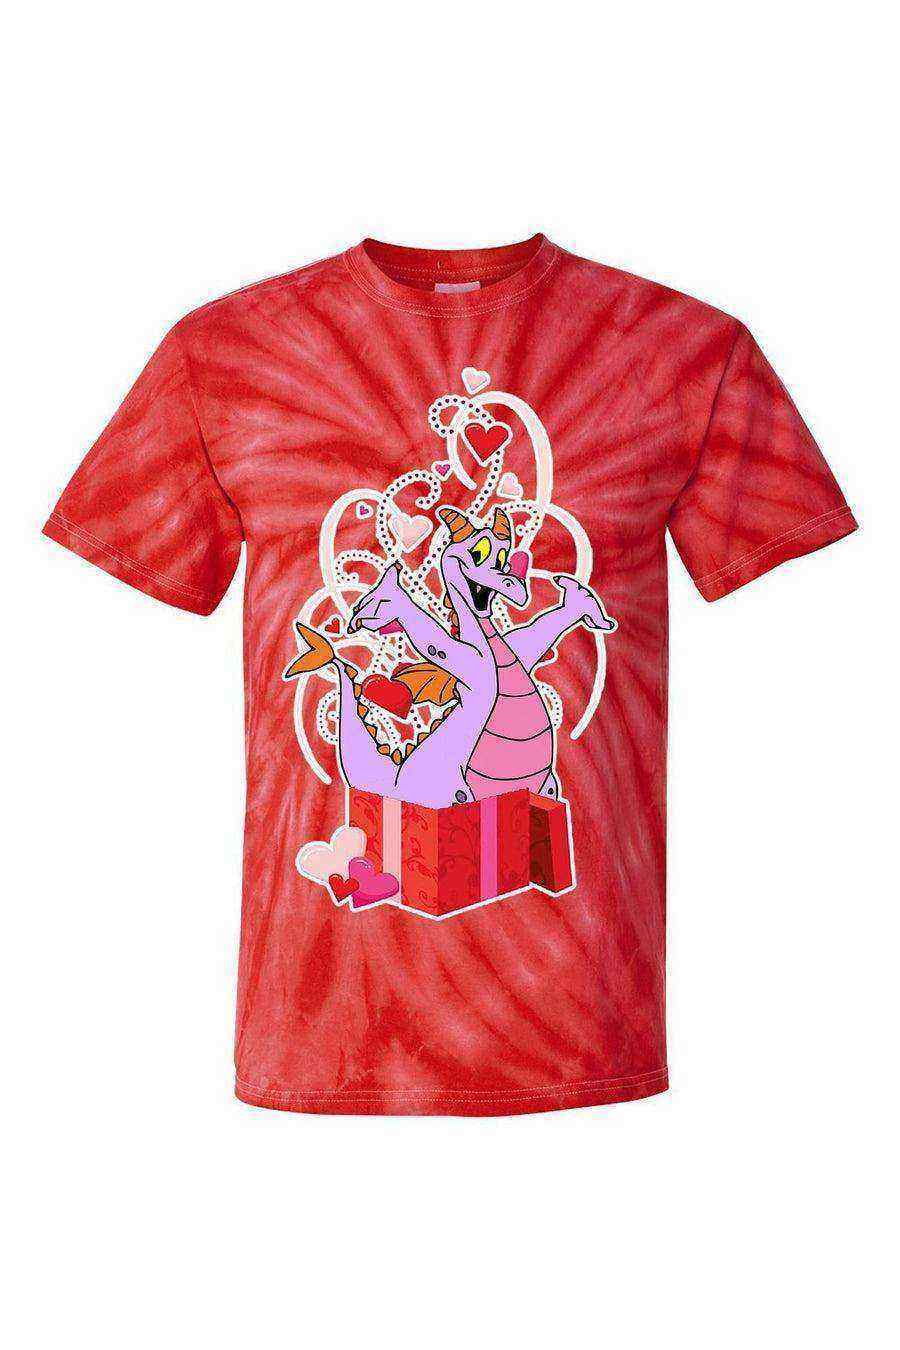 Figment Valentines Day Tie-Dye Shirt - Dylan's Tees